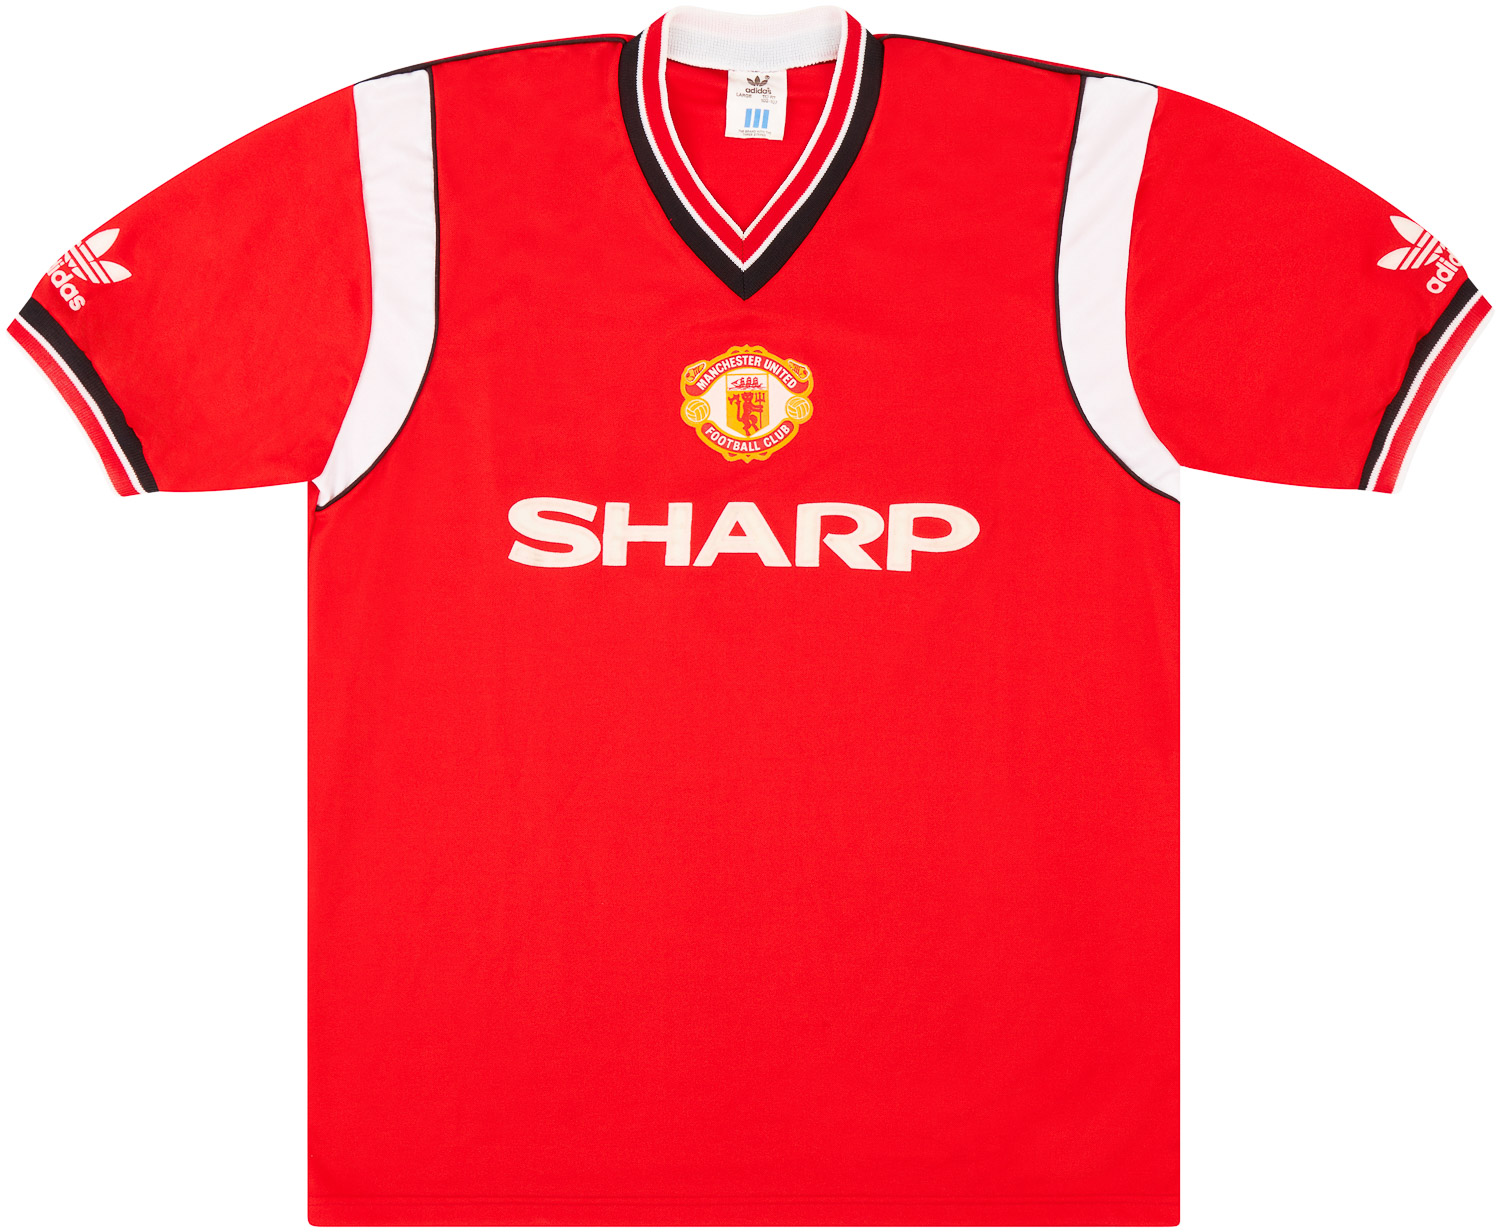 1984-86 Manchester United Home Shirt